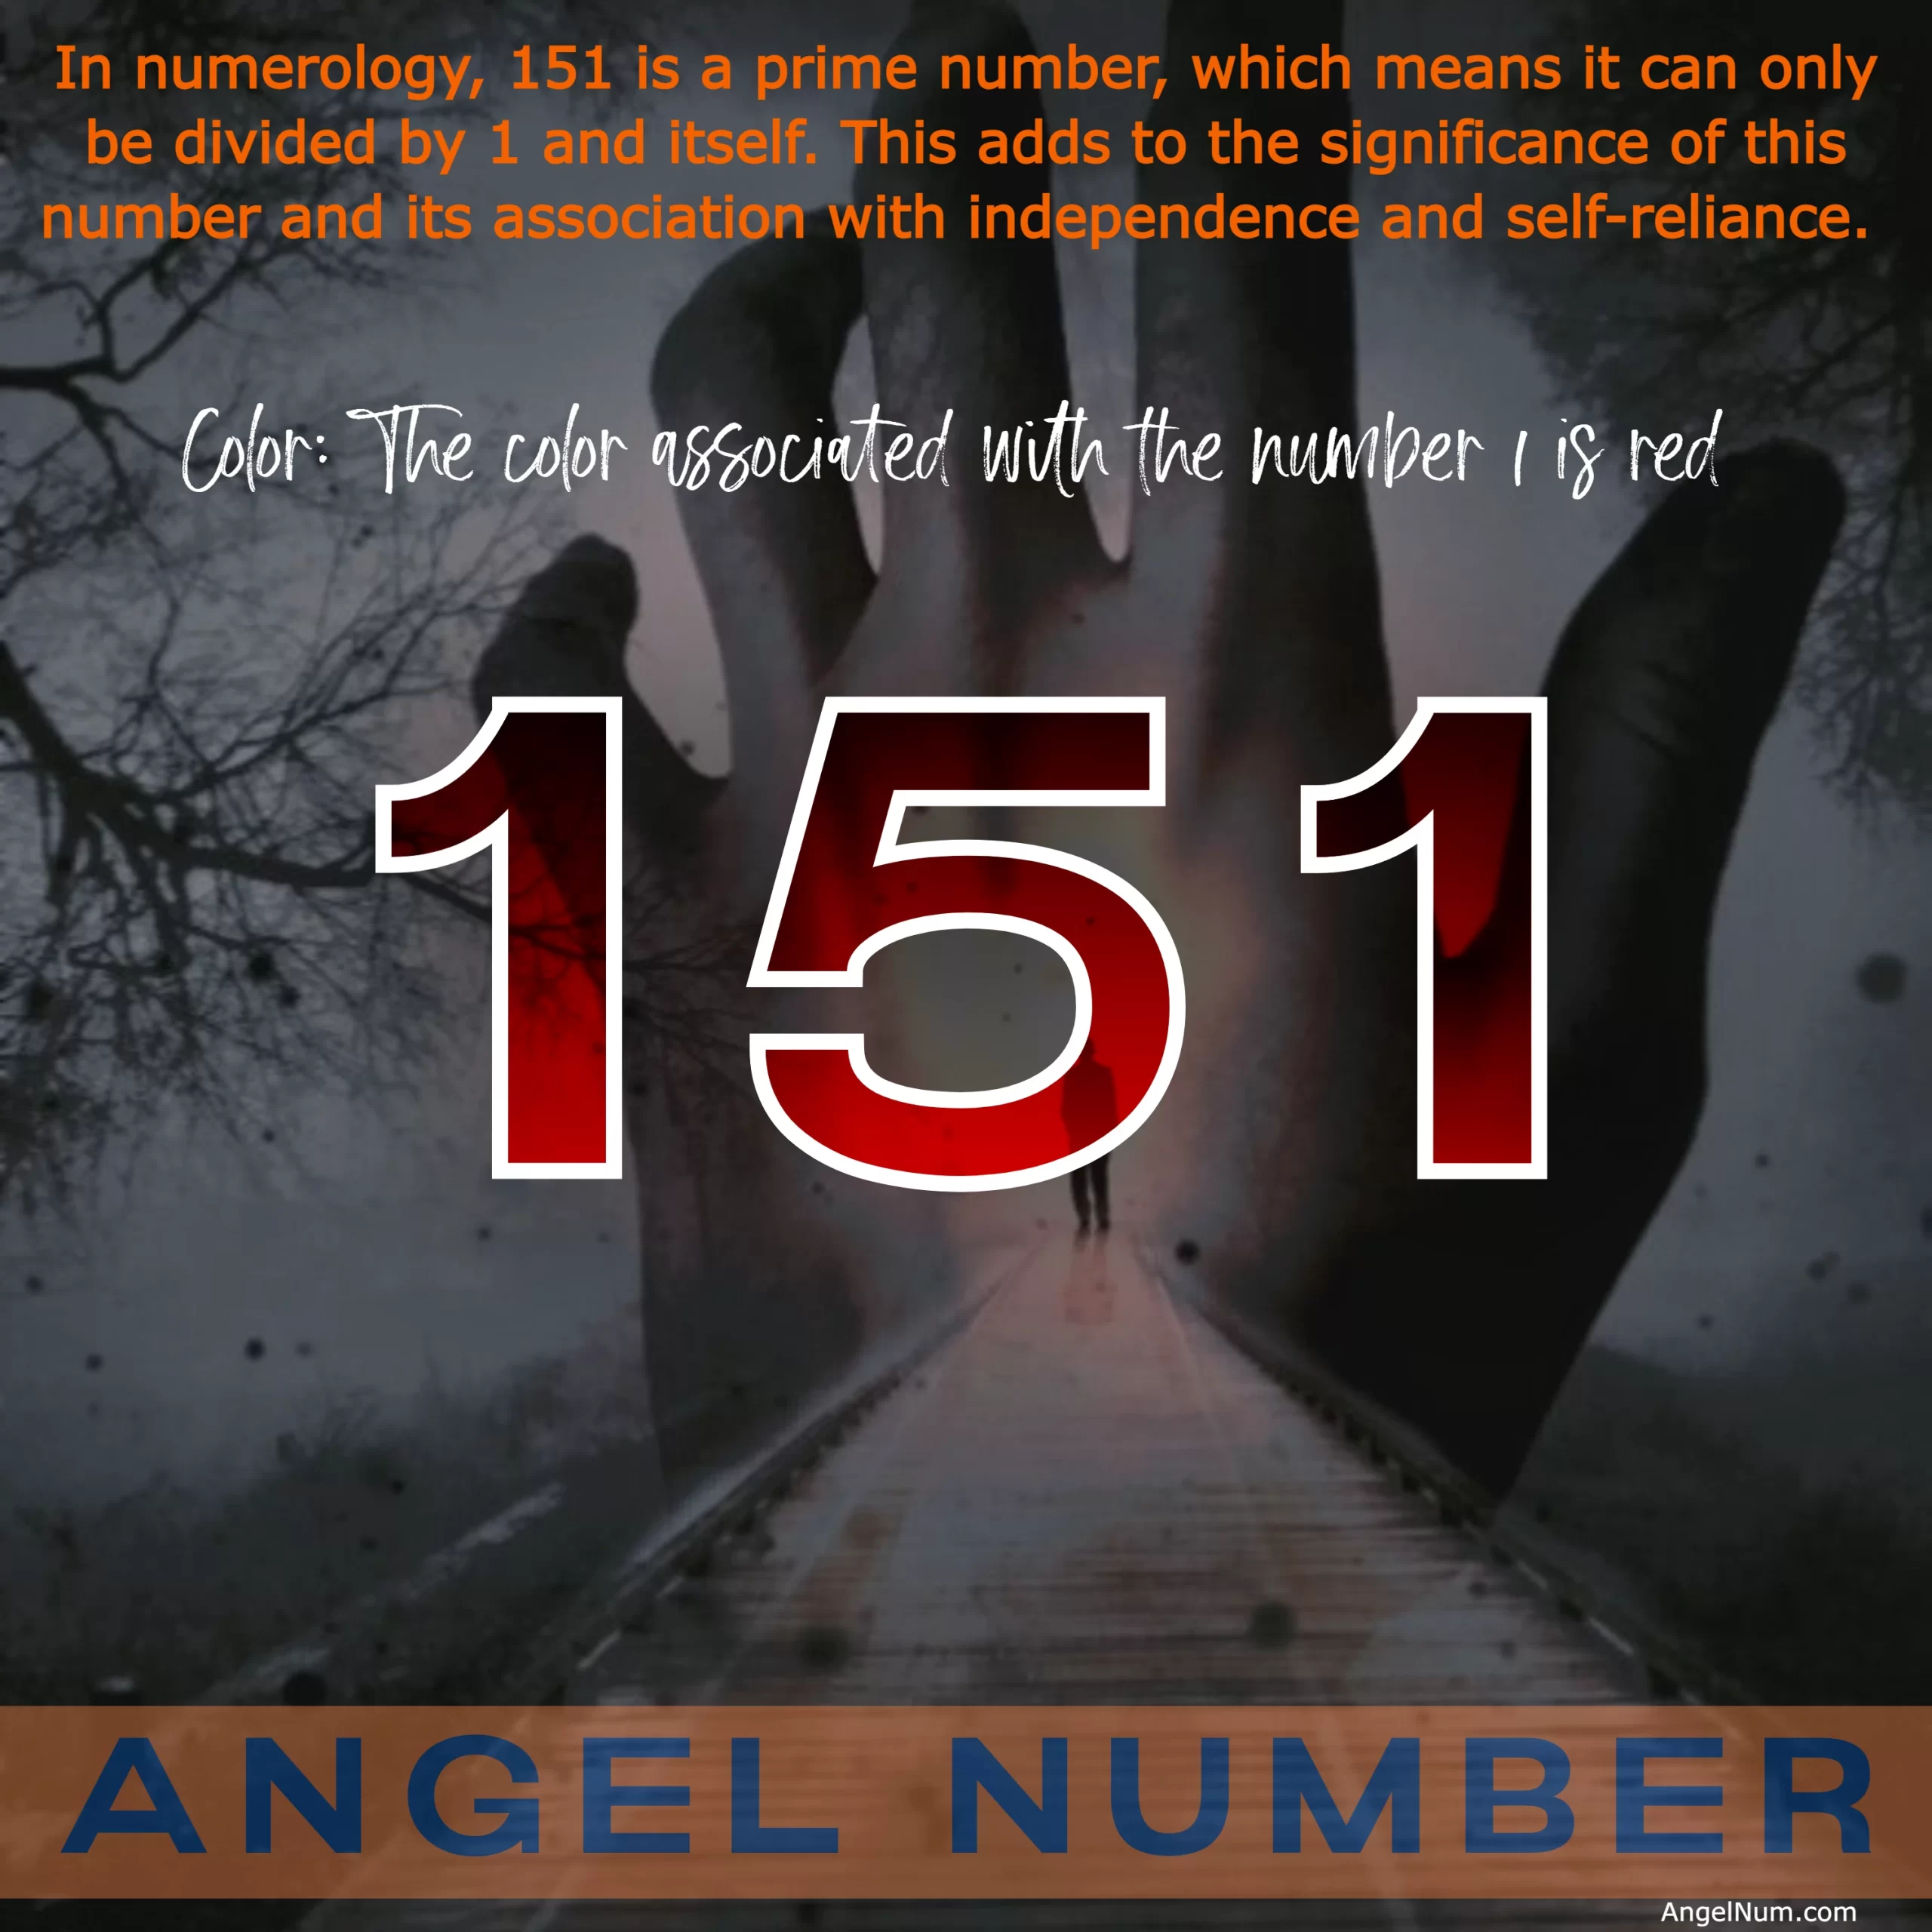 Angel Number 151: The Meaning, Symbolism, and Significance